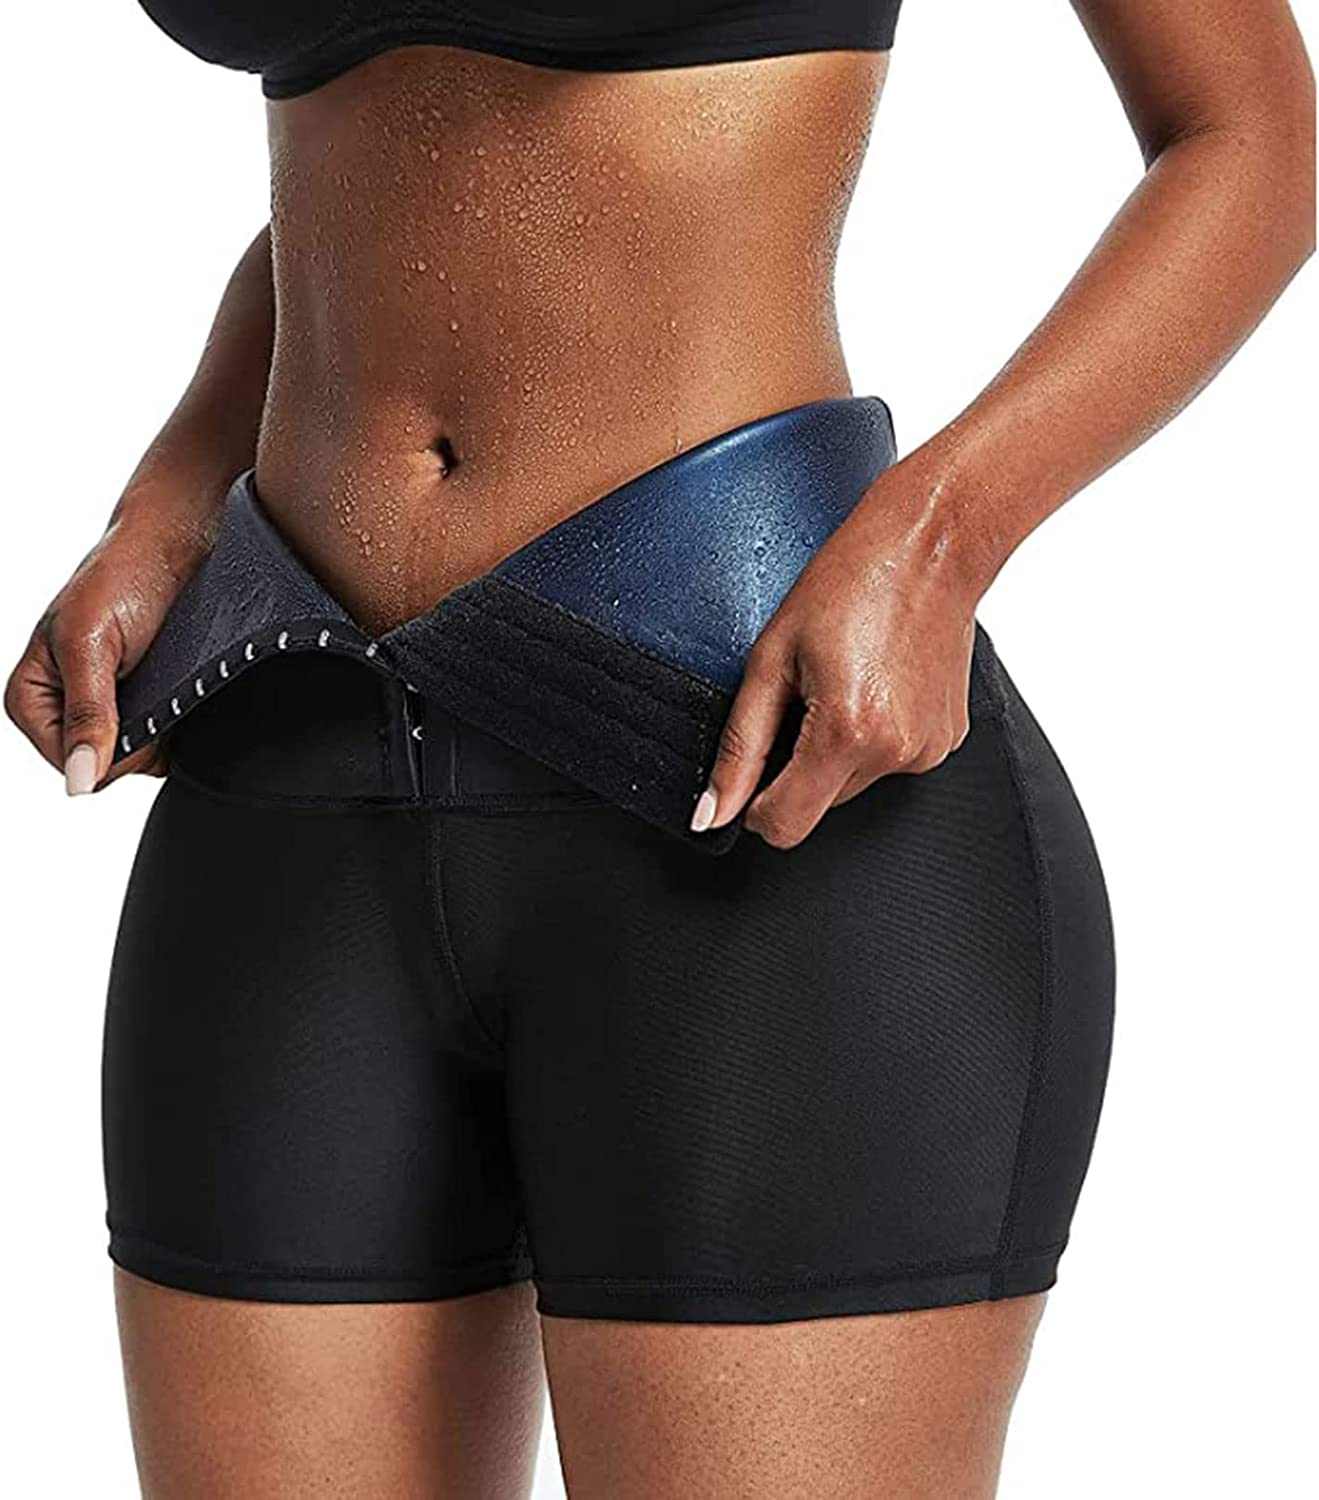 Chiccall High Waist Tummy Control Leggings for Women Waist Trainer Corset  Compression Seamless Buckle Yoga Pants on Clearance